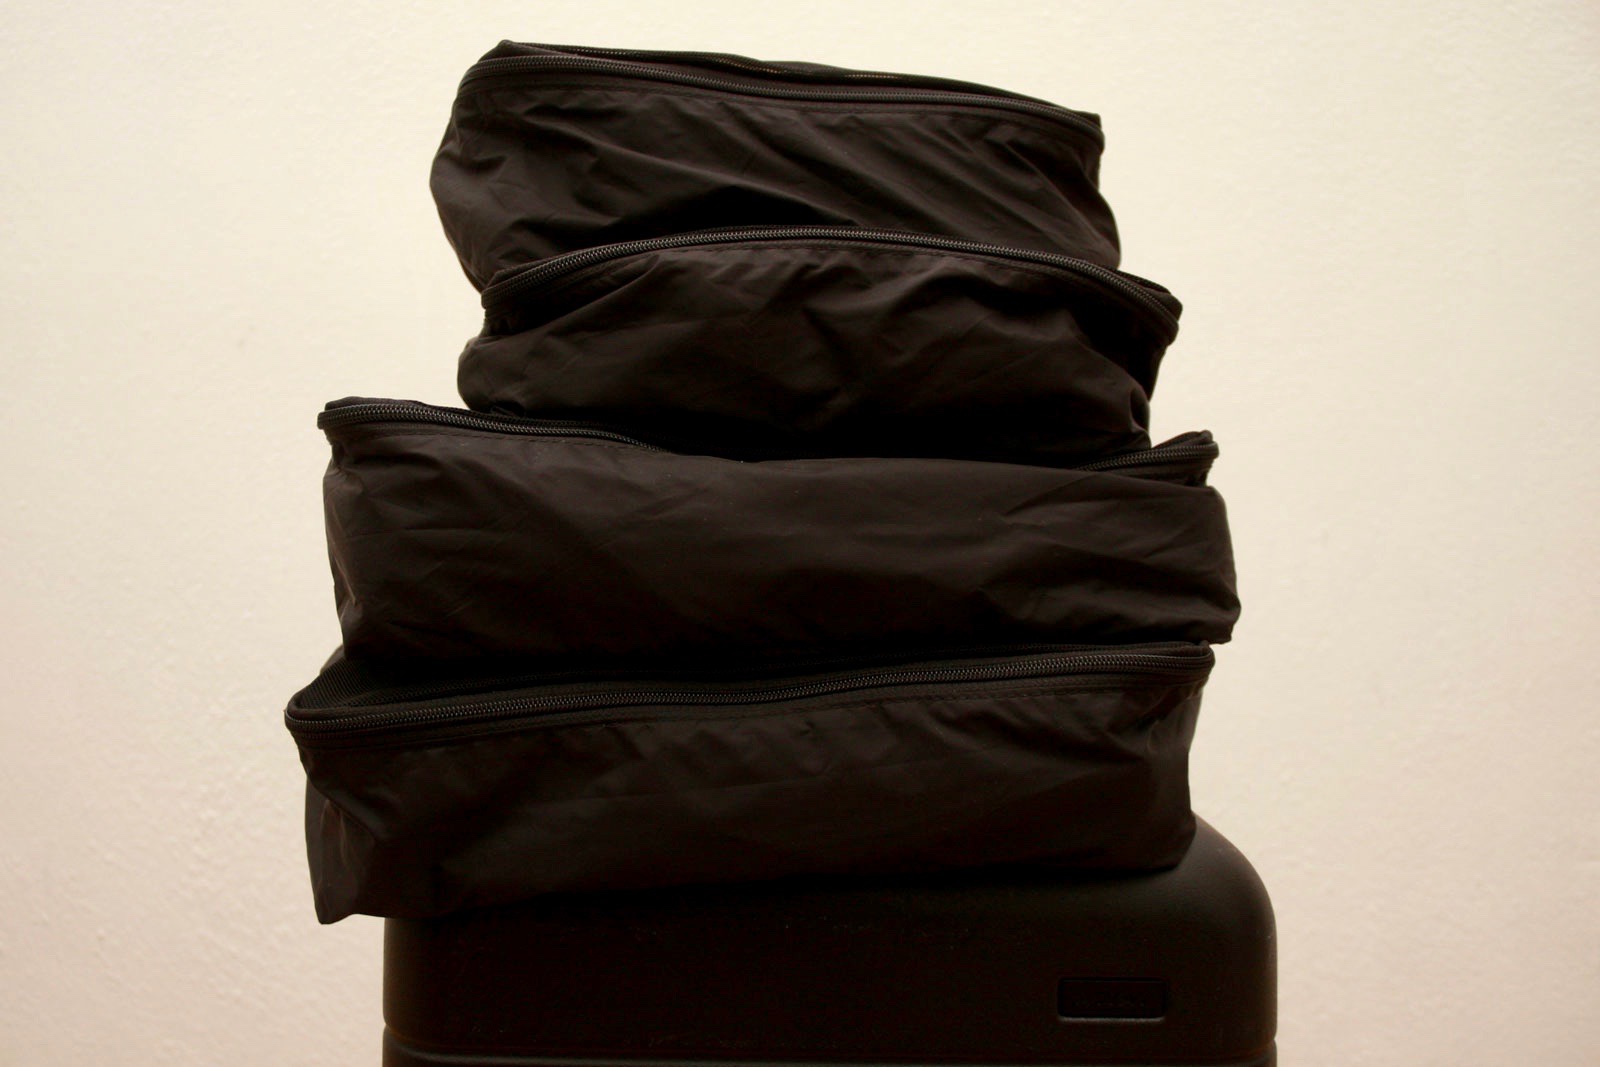 A stack of Away Packing Cubes on top of a carry-on